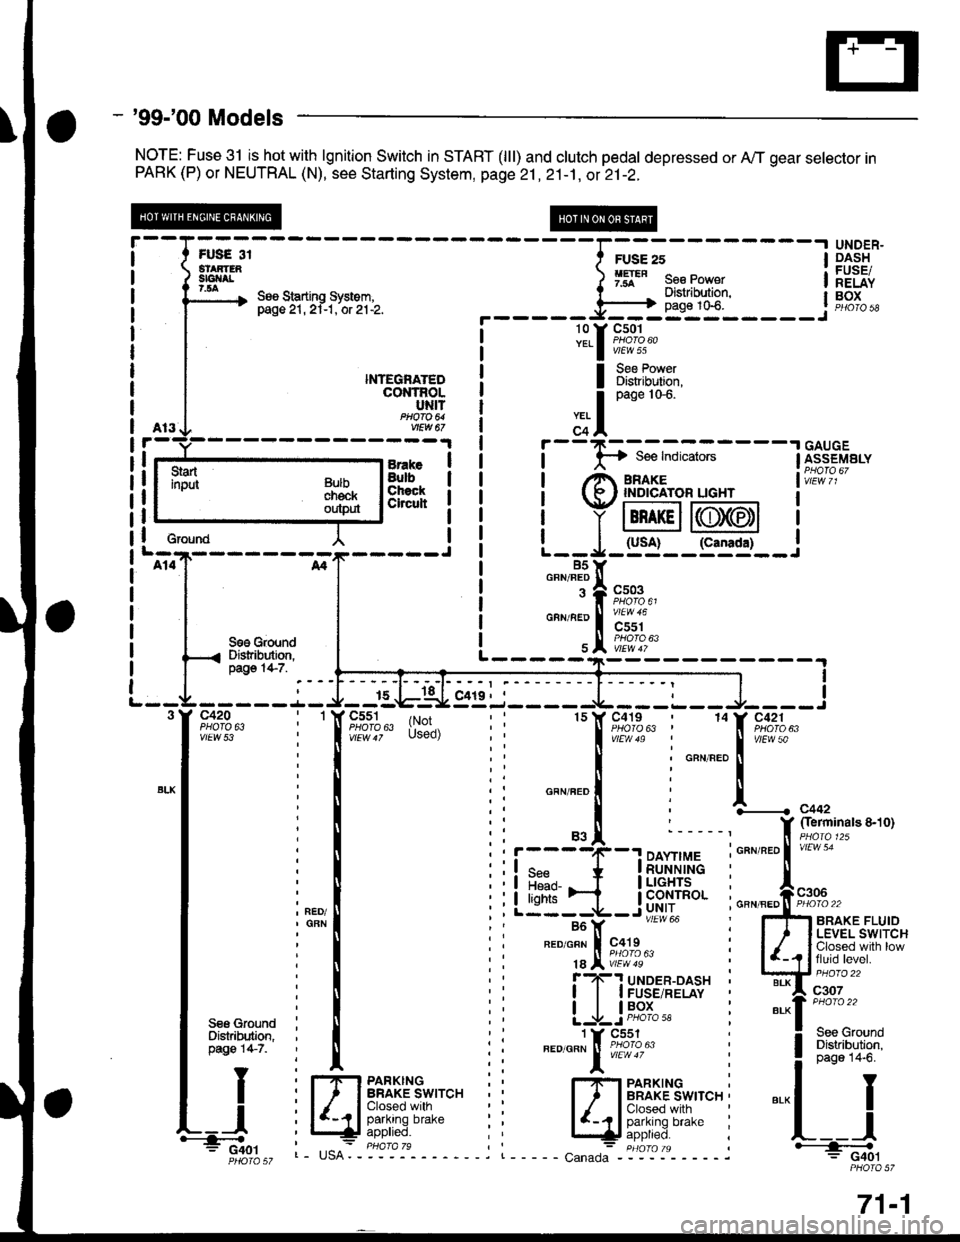 HONDA CIVIC 1998 6.G Manual PDF - 99-00 Models
NOTE: Fuse 31 isJtot with lgnition Switch in START (lll) and clutch pedal depressed or A,,/T gear selector inPARK (P) or NEUTRAL (N), see Starting System, page 21 ,2i-1, ot 21-2.
UNDE